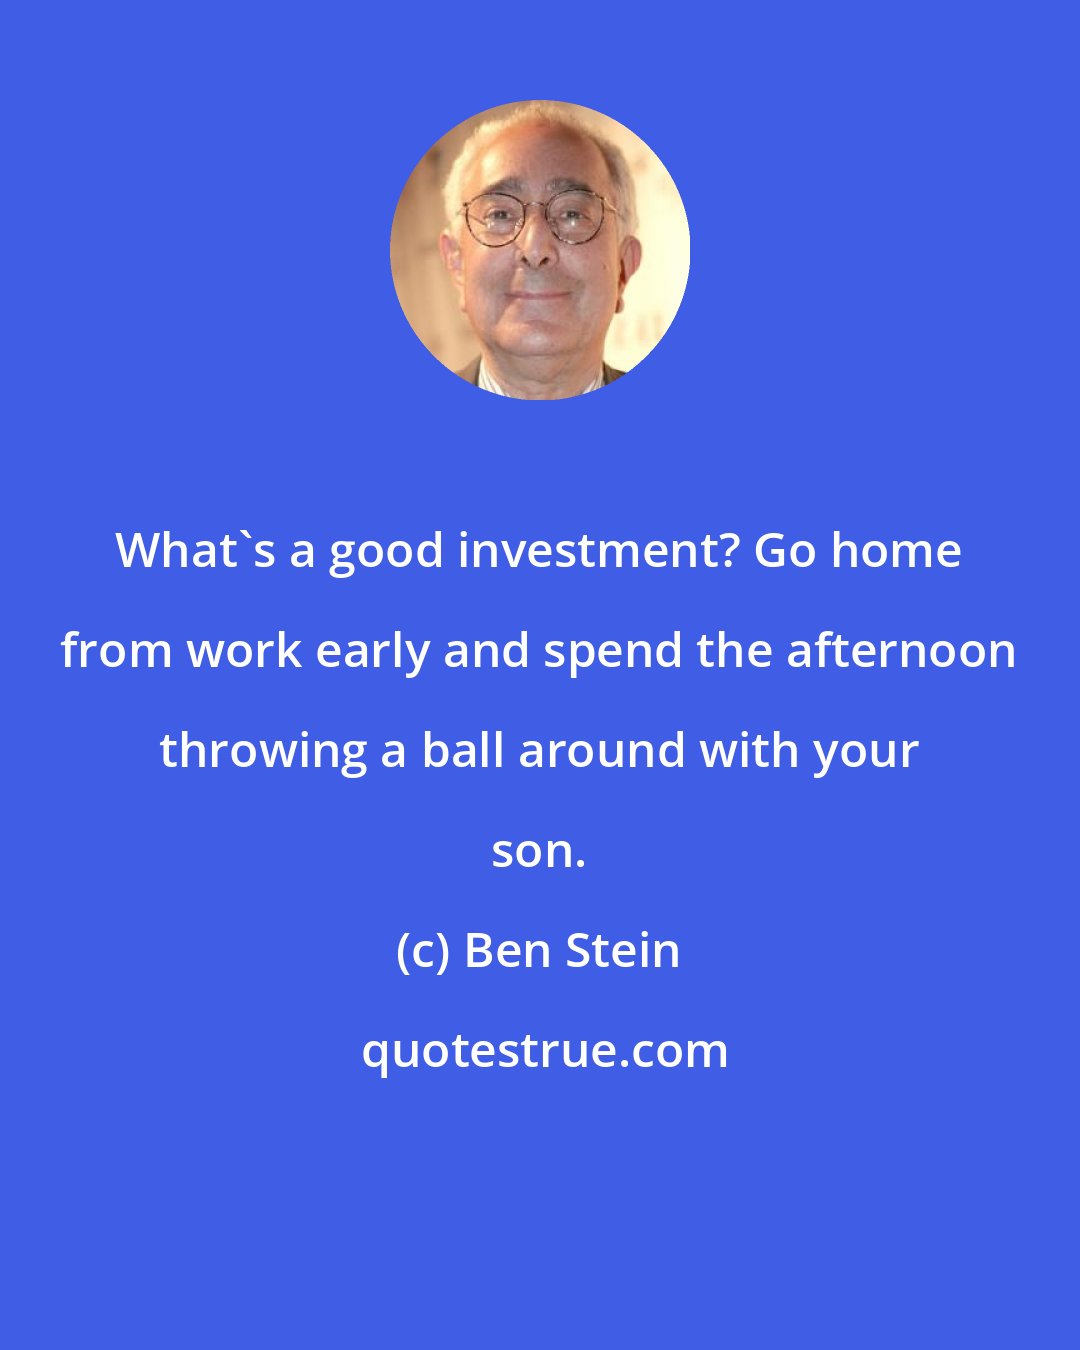 Ben Stein: What's a good investment? Go home from work early and spend the afternoon throwing a ball around with your son.